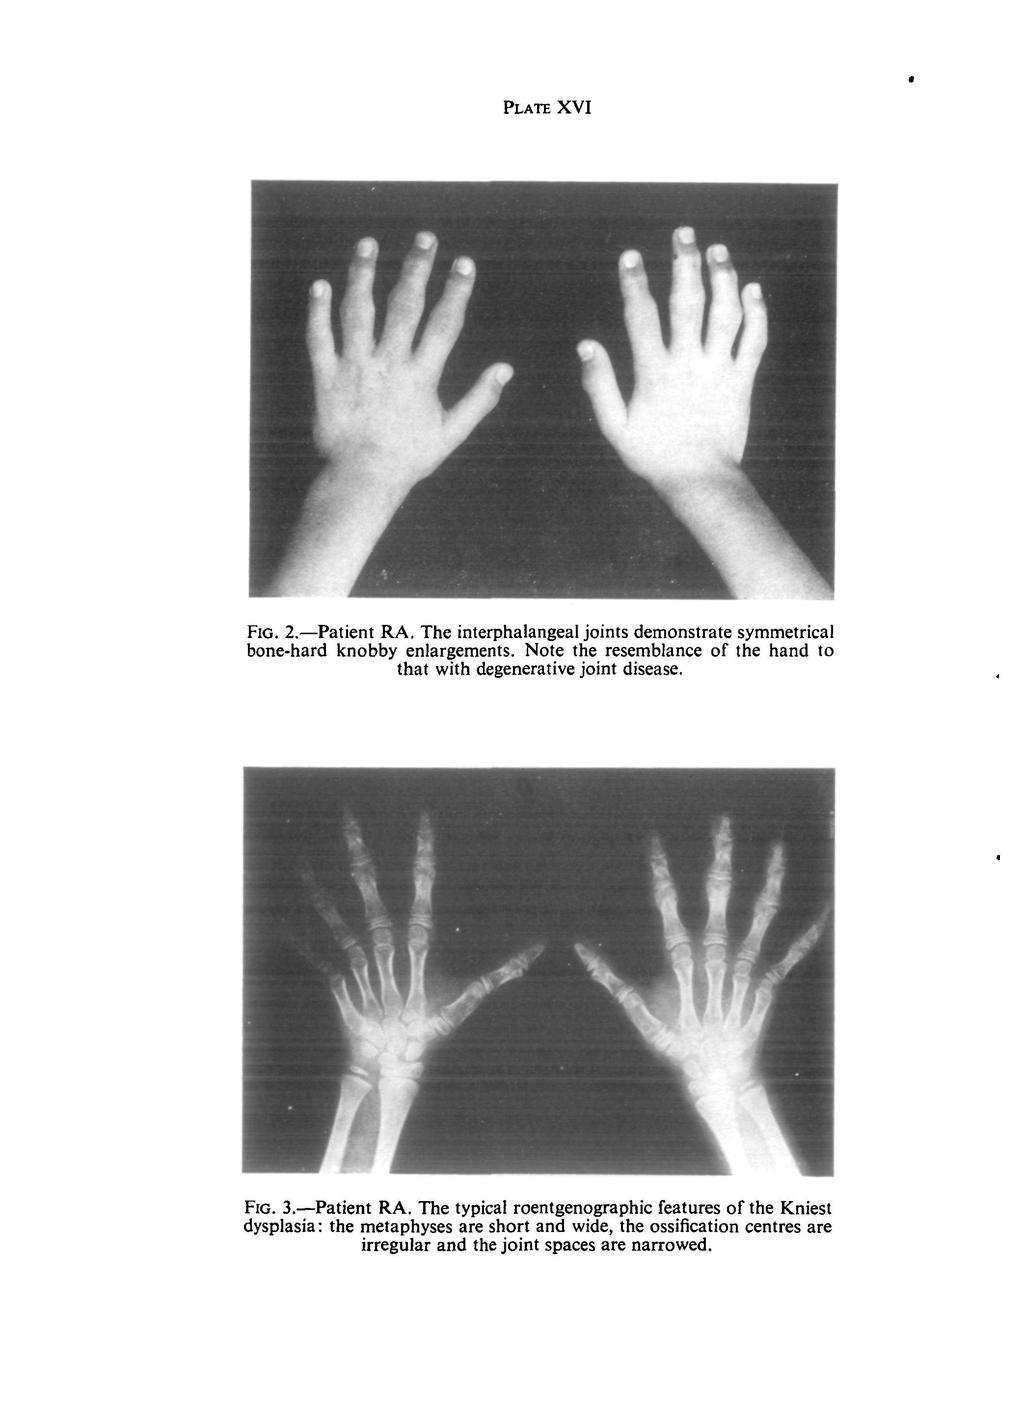 PLATE XVI FIG. 2. Patient RA. The interphalangeal joints demonstrate symmetrical bone-hard knobby enlargements. Note the resemblance of the hand to that with degenerative joint disease.